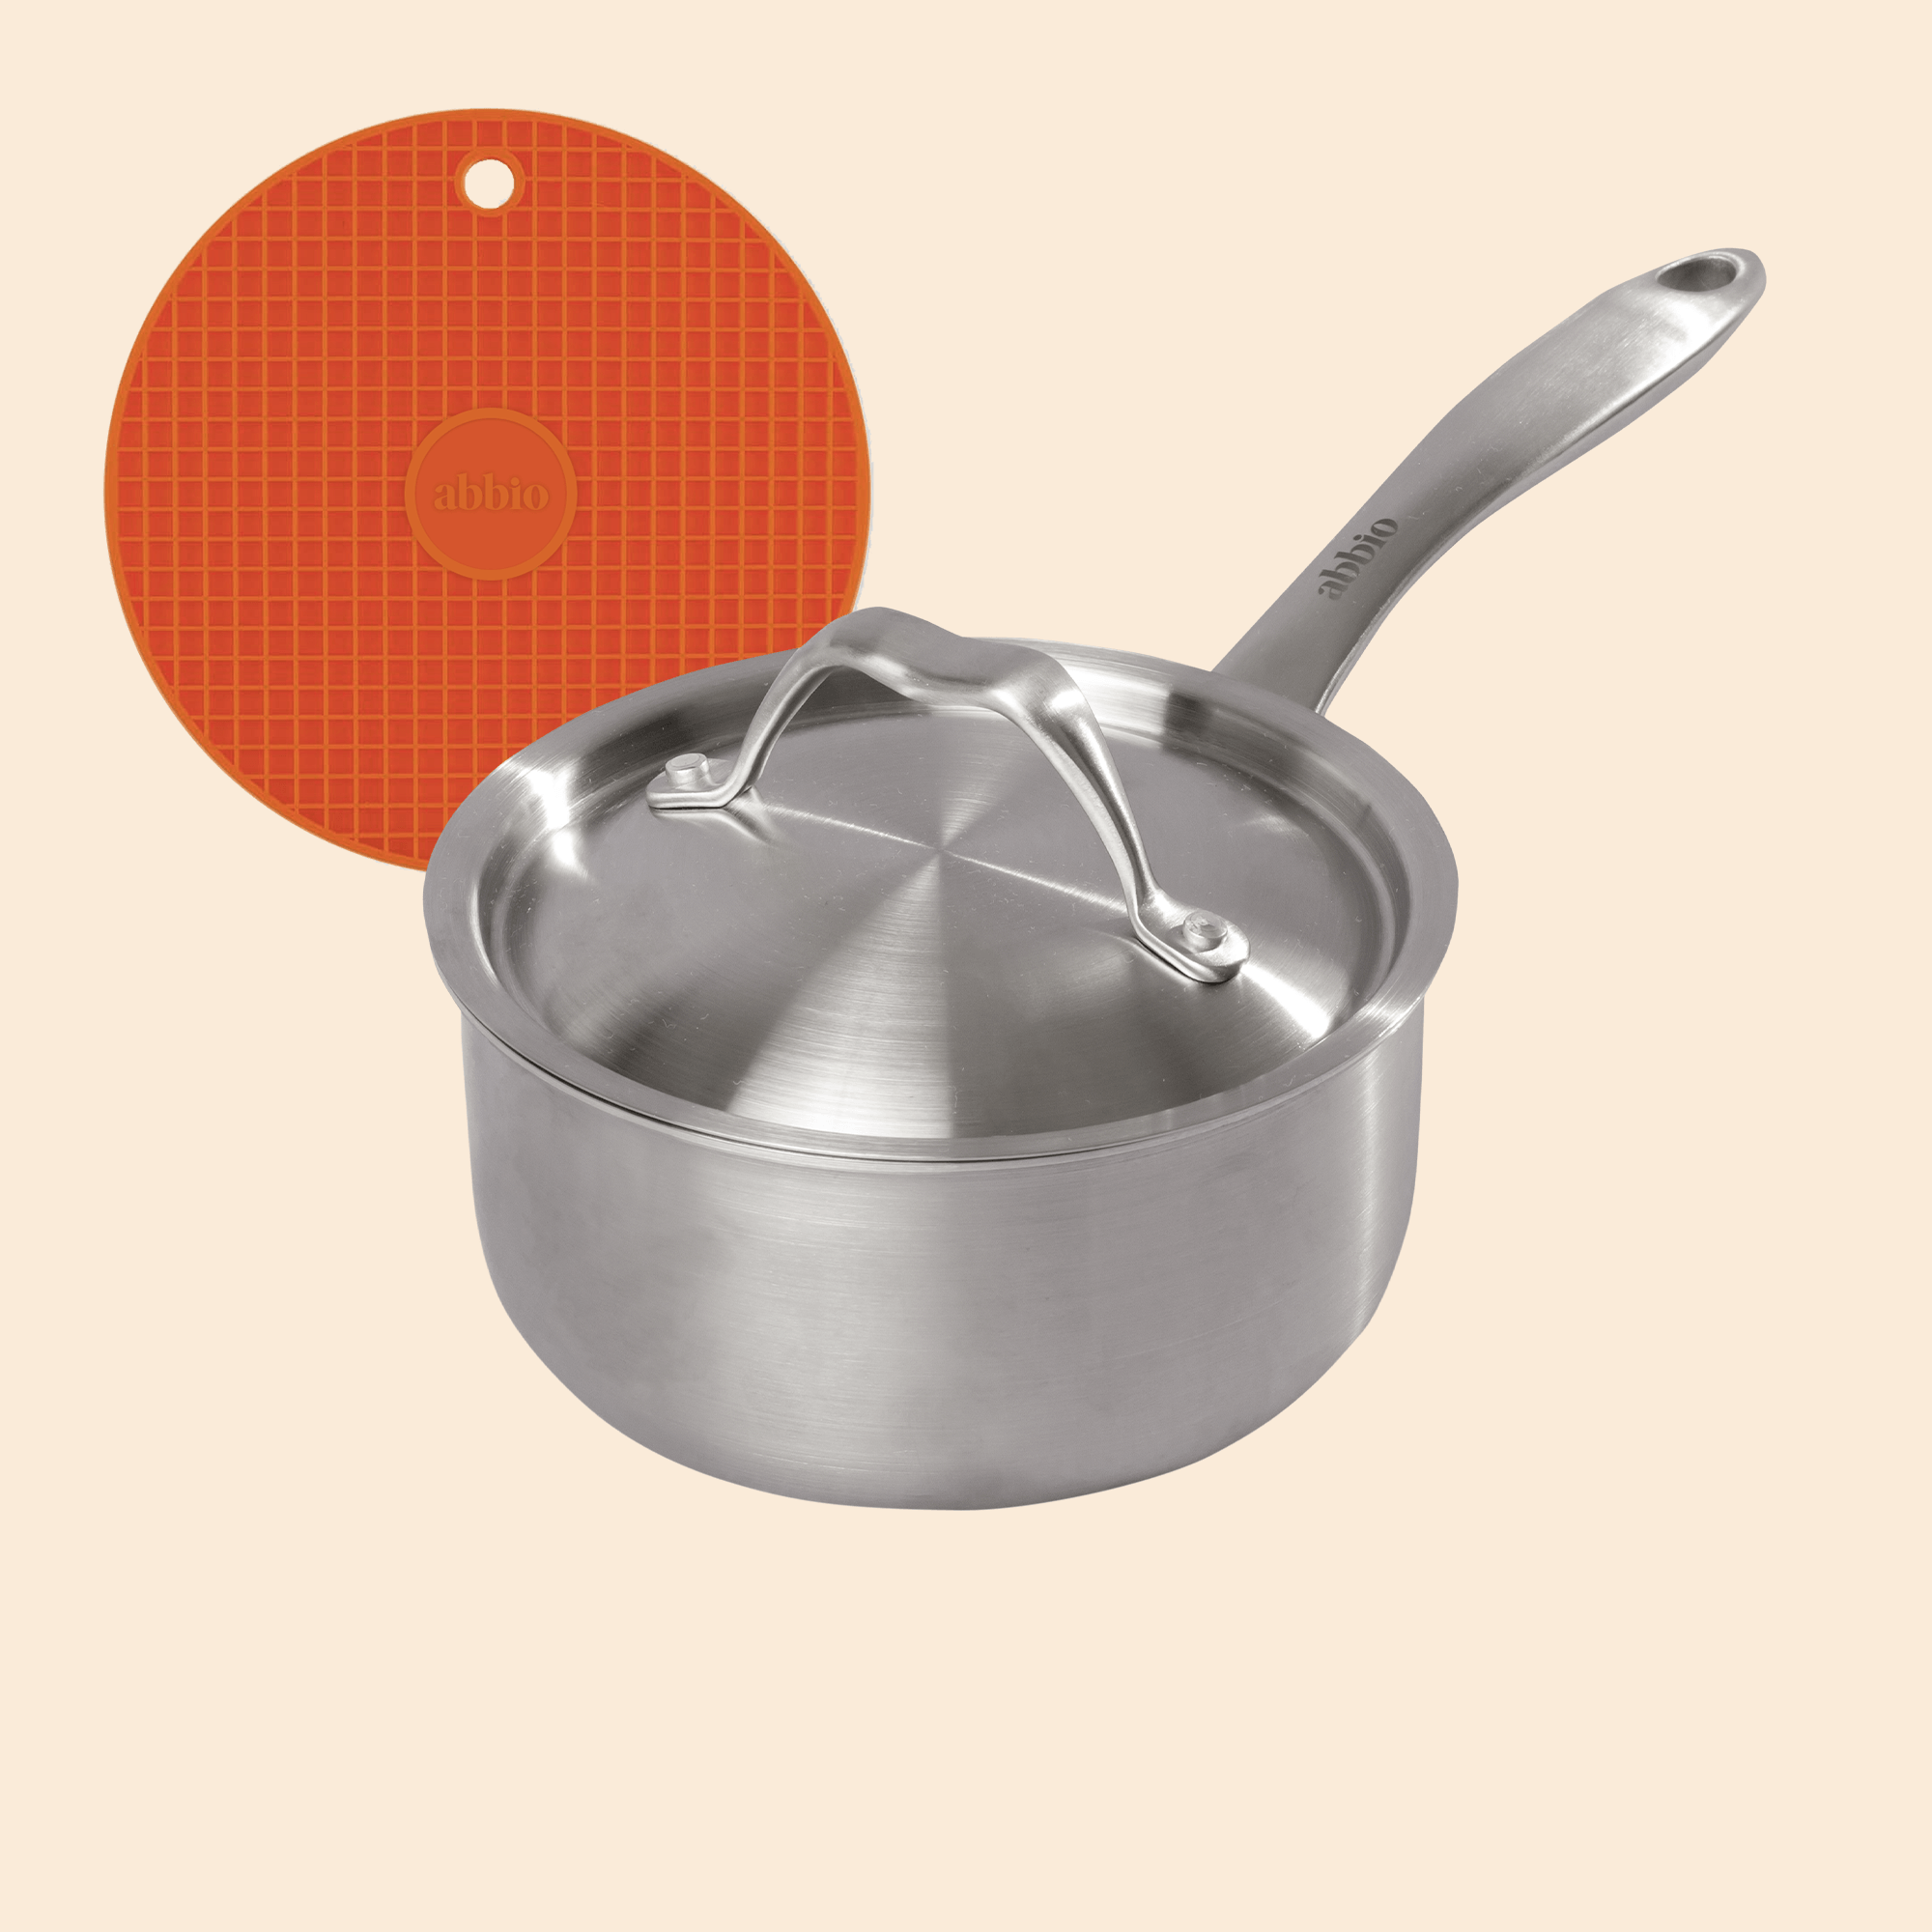 Calphalon Tri-Ply 4.5 qt. Aluminum Sauce Pan in Stainless Steel